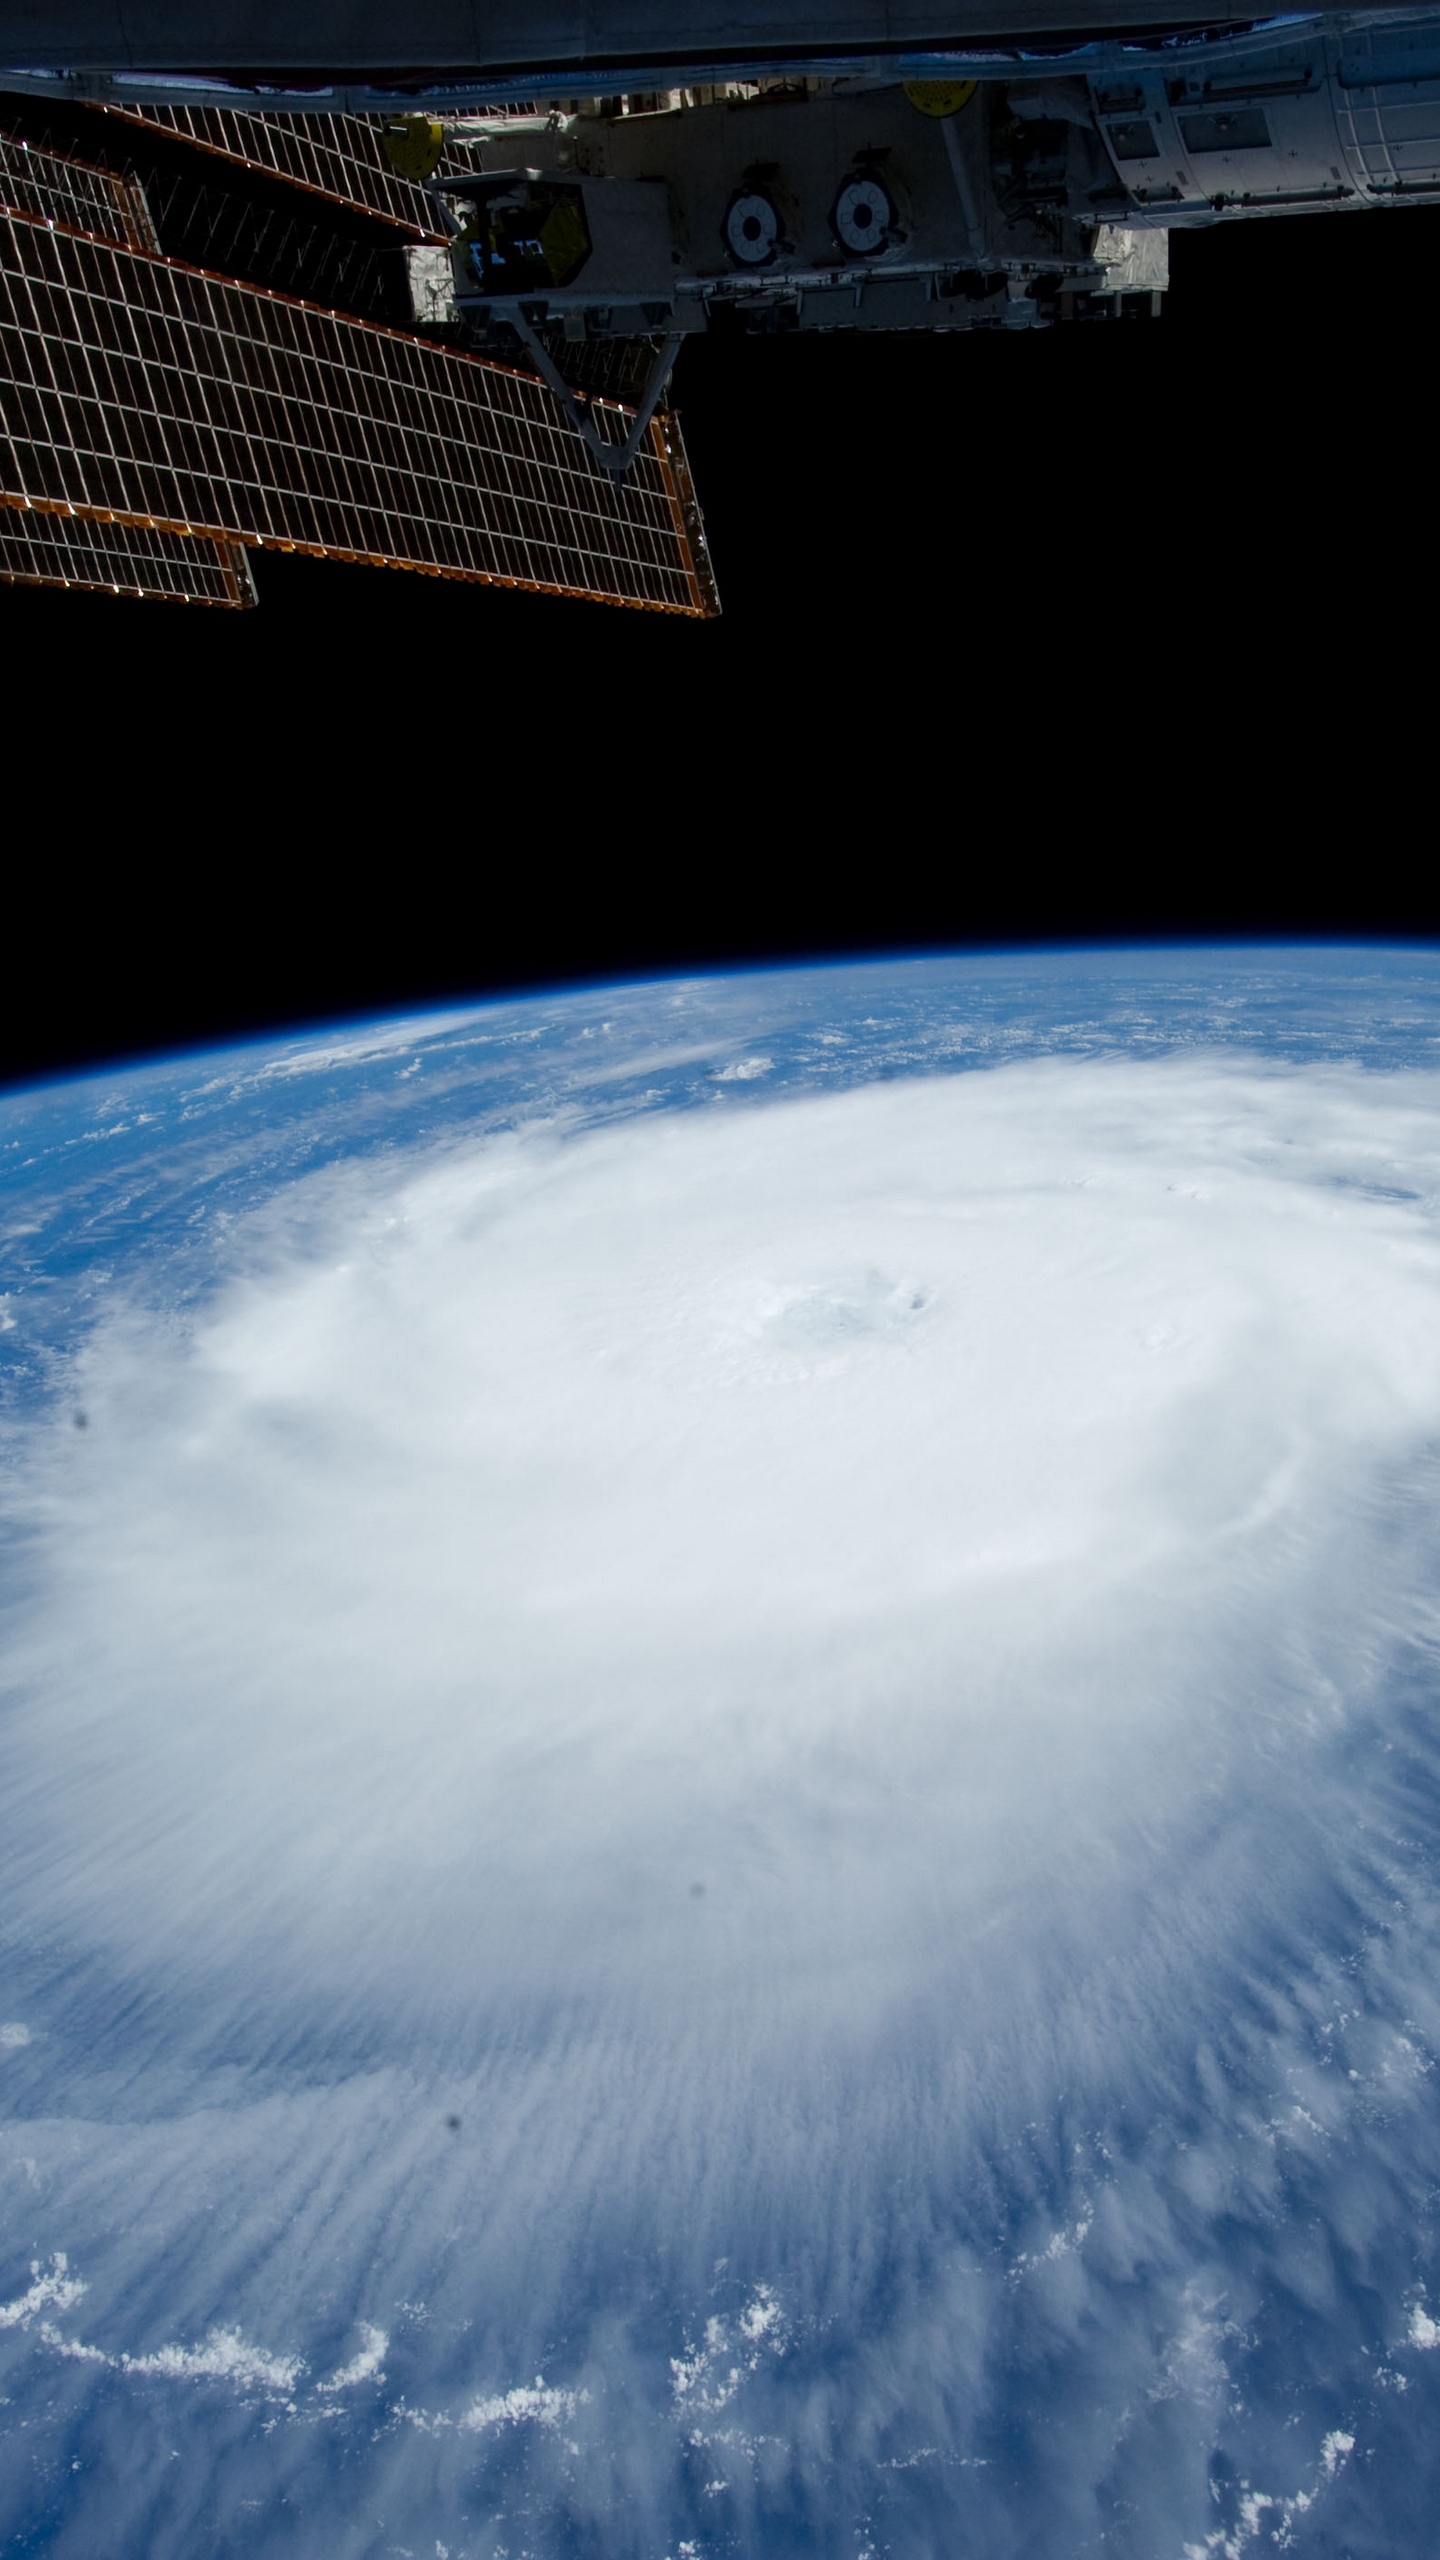 Wallpaper Hurricane, Iss, Earth, Clouds, Element - Hd Wallpaper Space For Iphone 6 - HD Wallpaper 